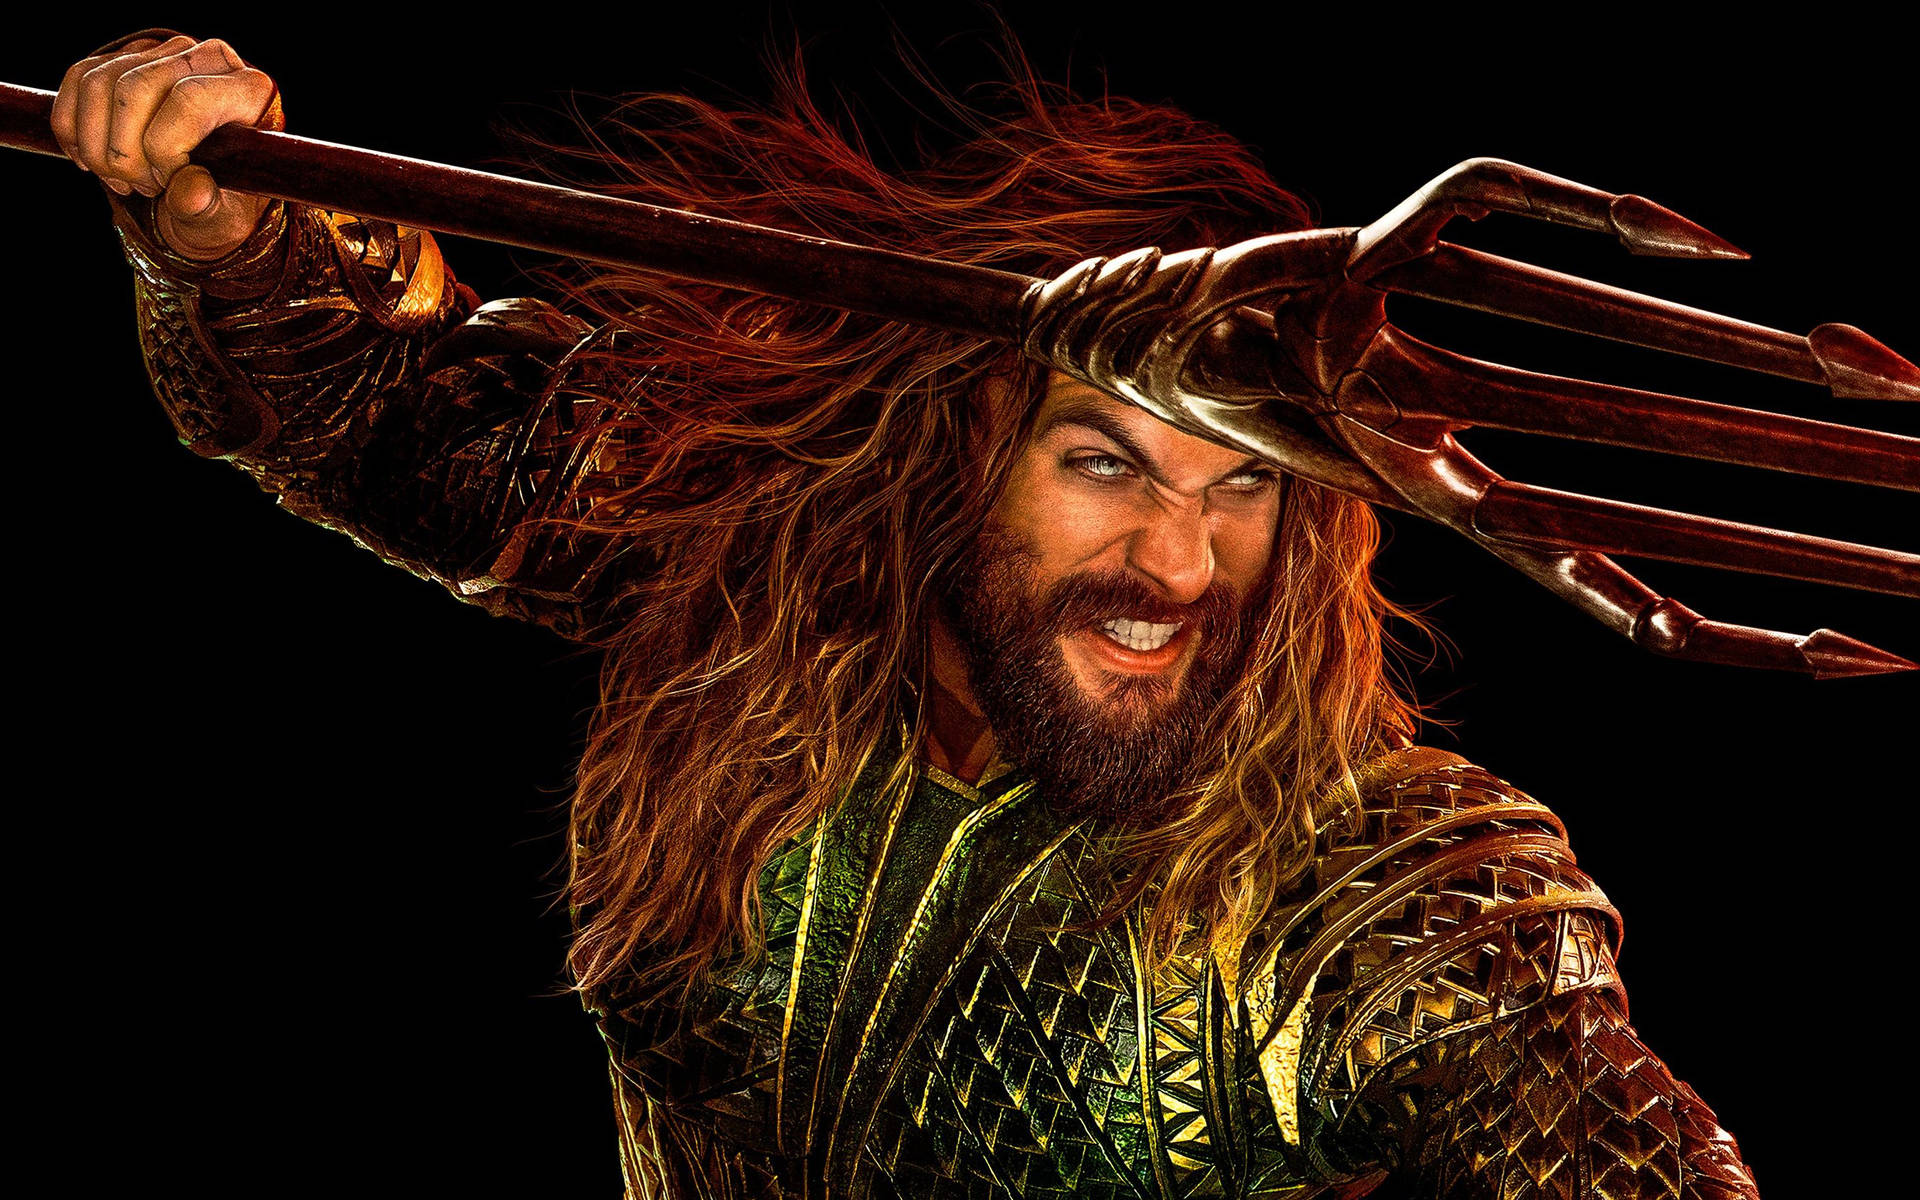 Up Close and Personal with Aquaman Wallpaper